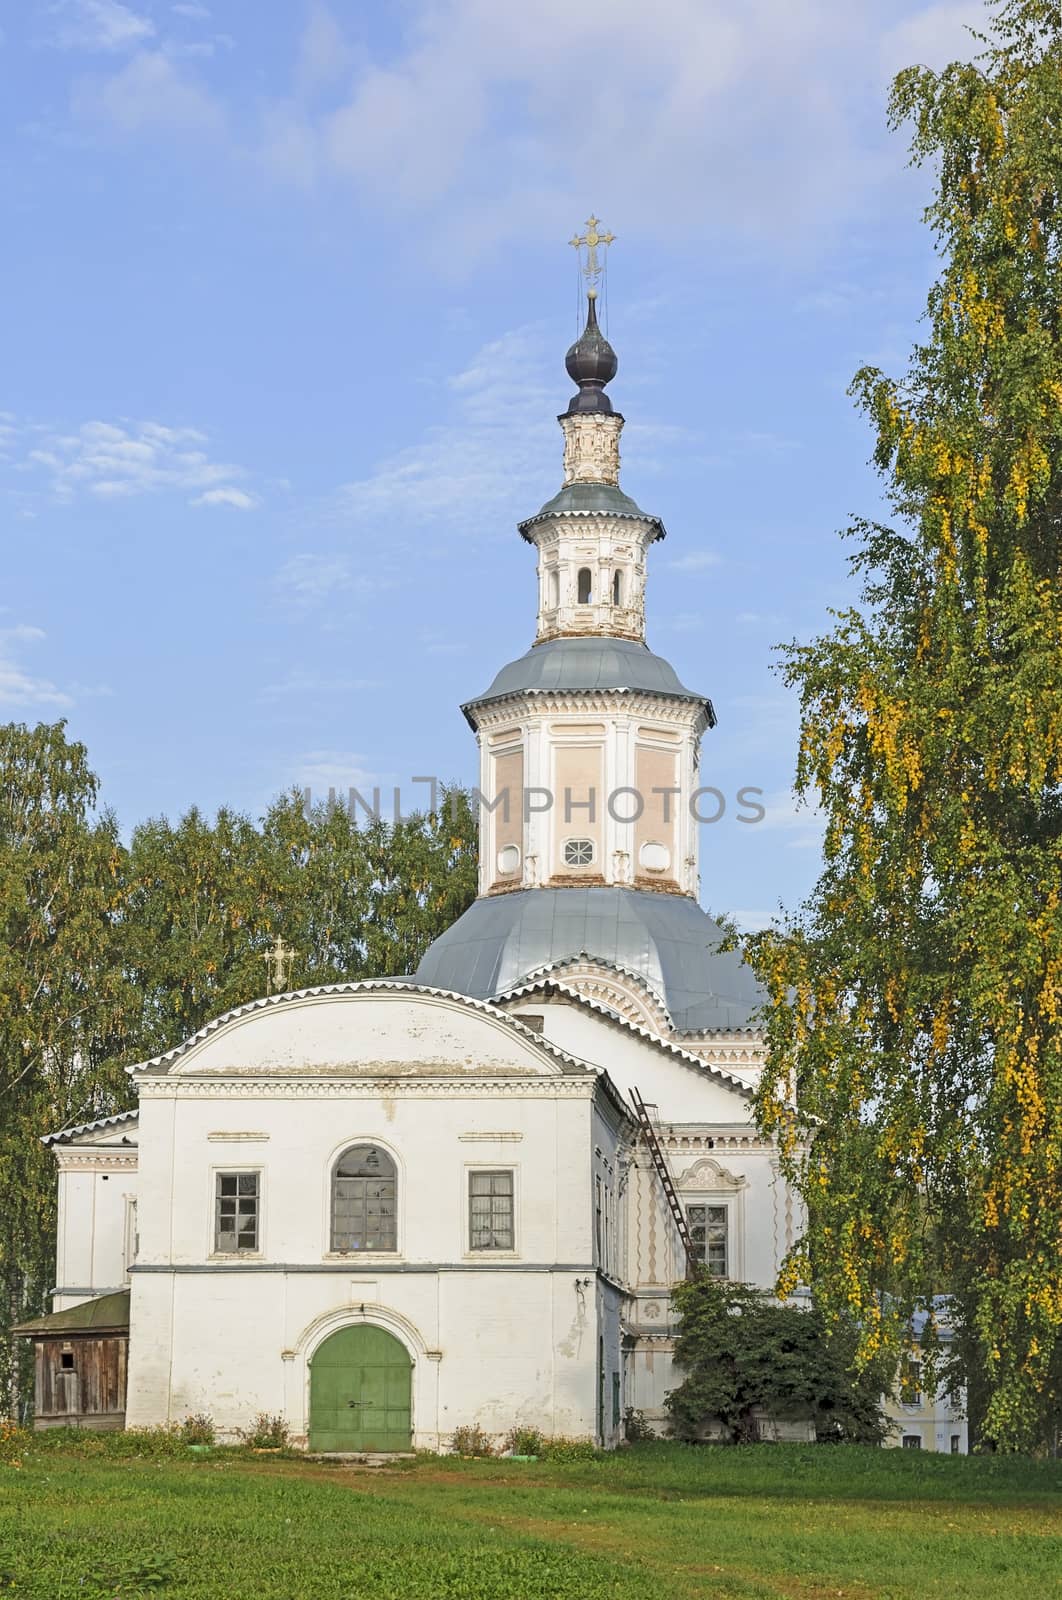 Purification Church (late 17th century) in Great Ustyug, North Russia